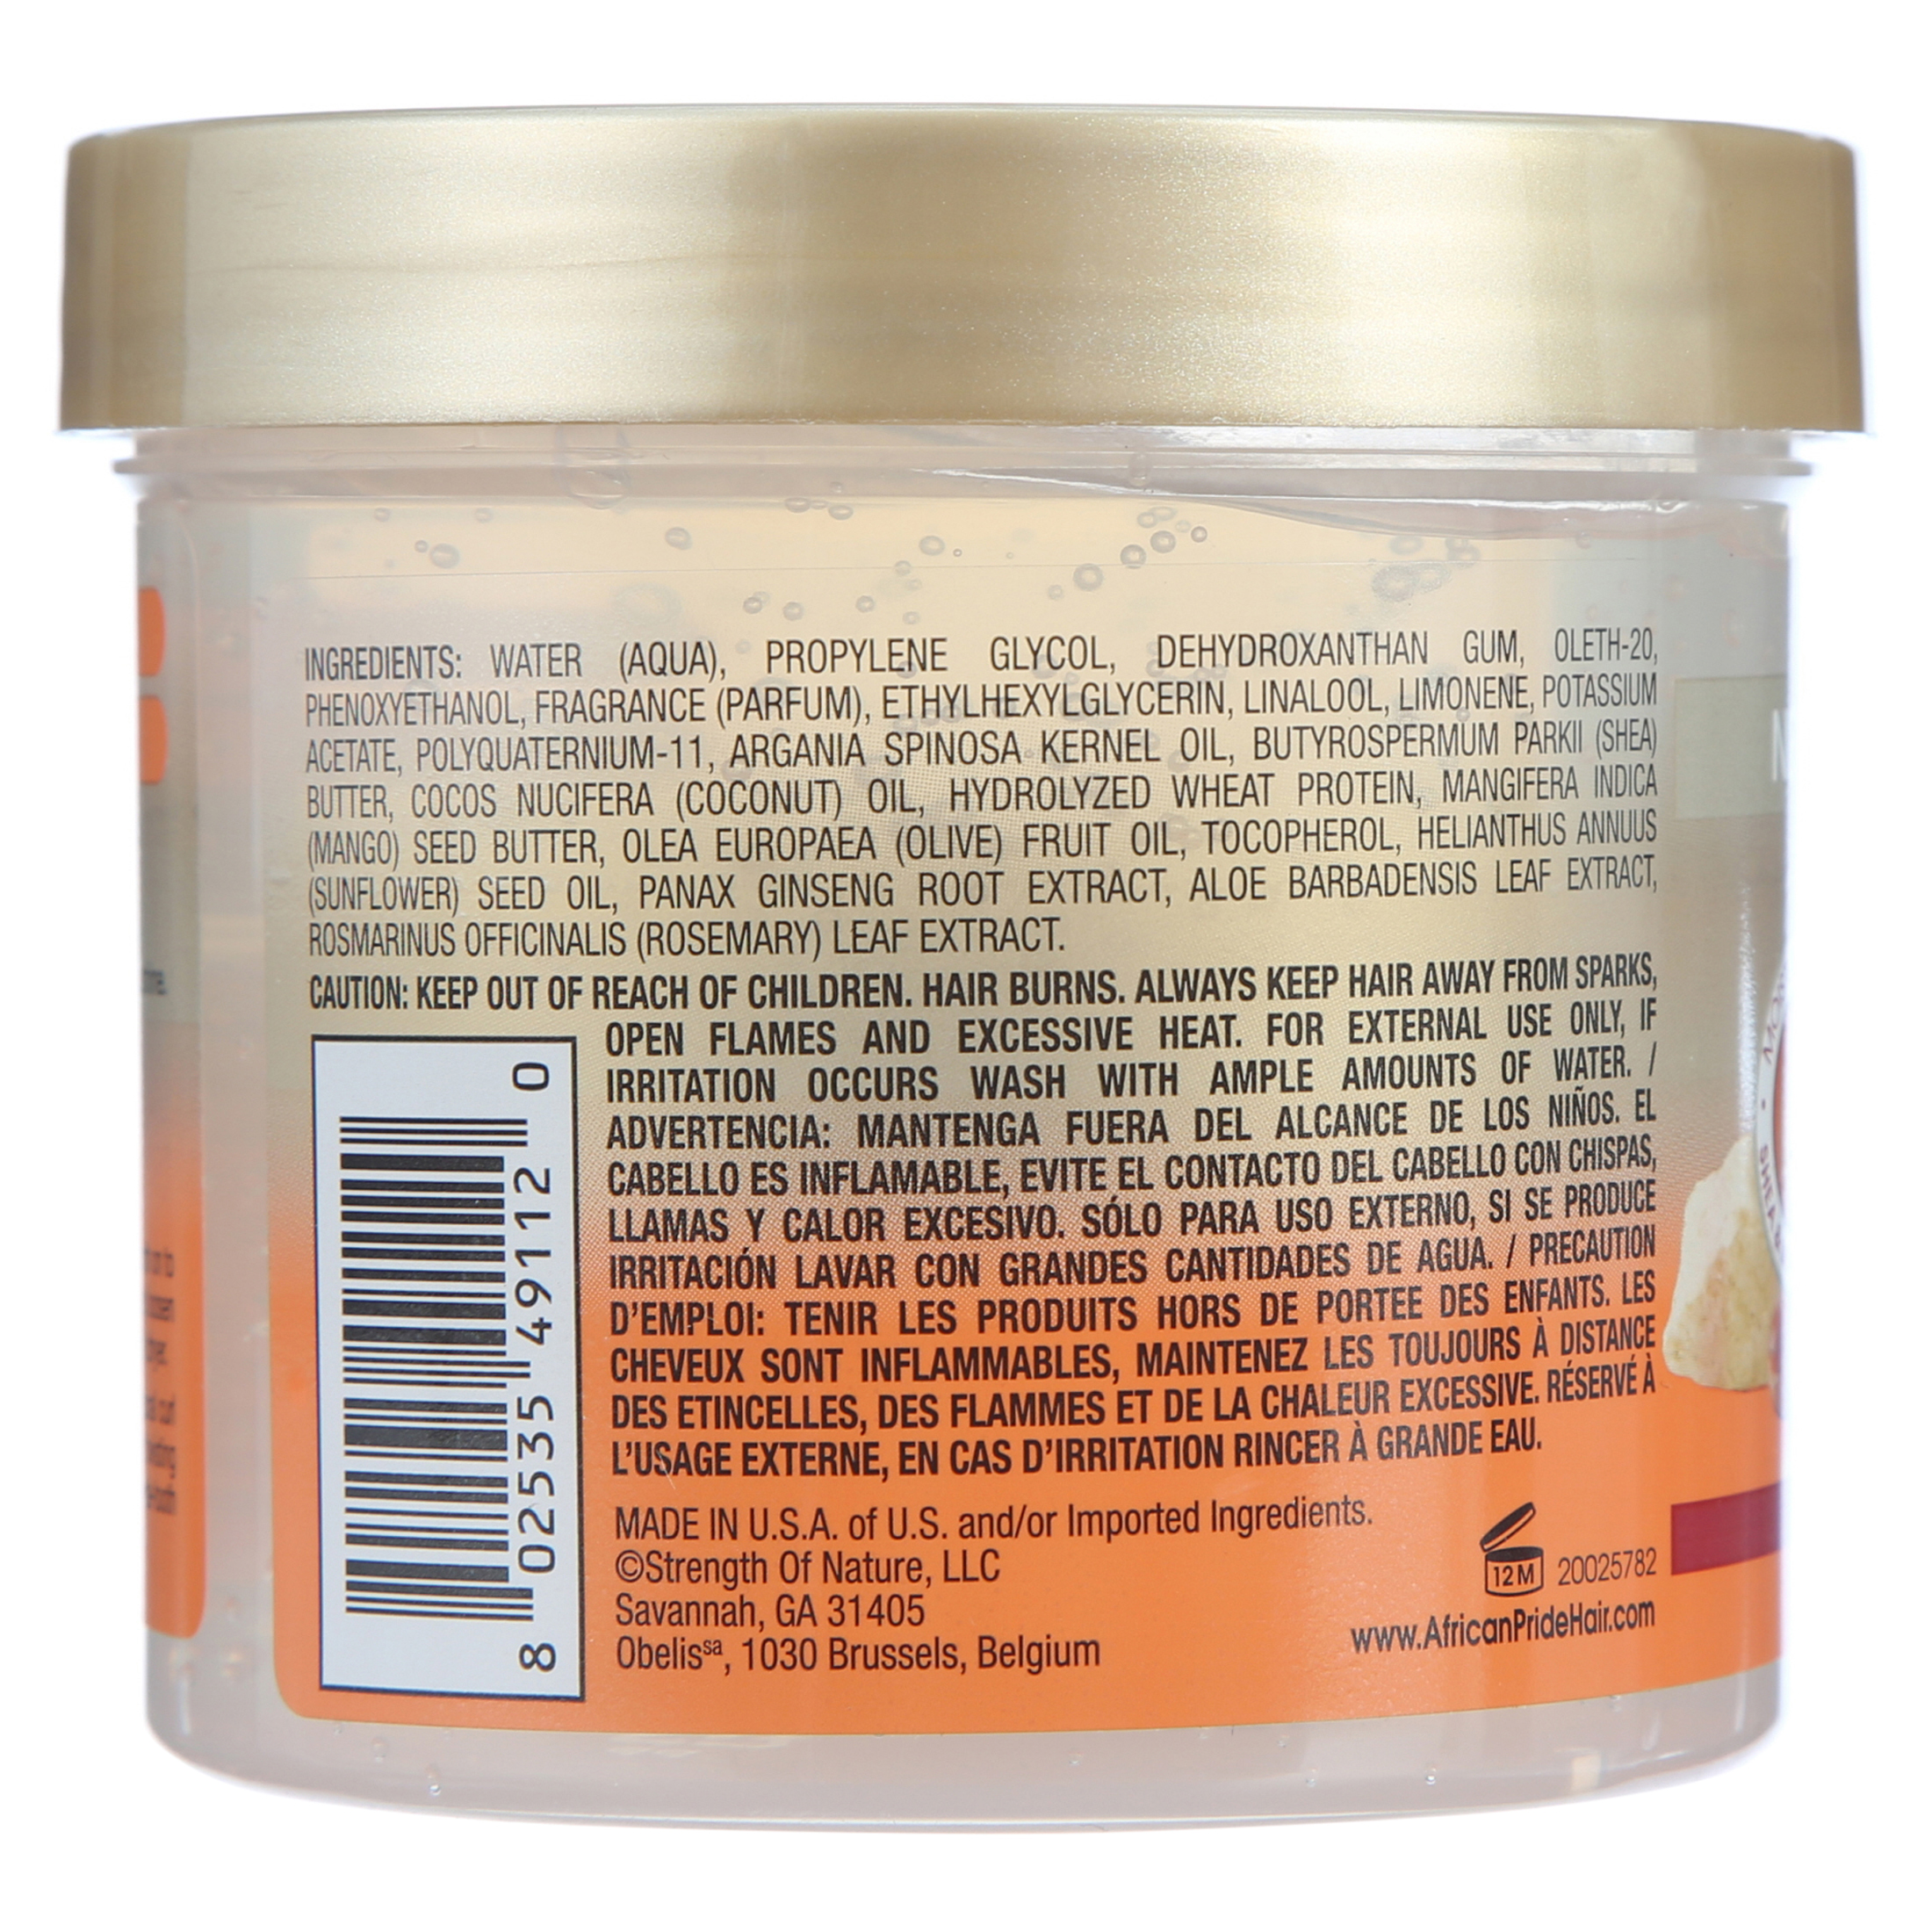 African Pride Curl Styling Cream Custard for Wavy, Curly, Coily Hair with Shea Butter, 12 oz. - image 3 of 5